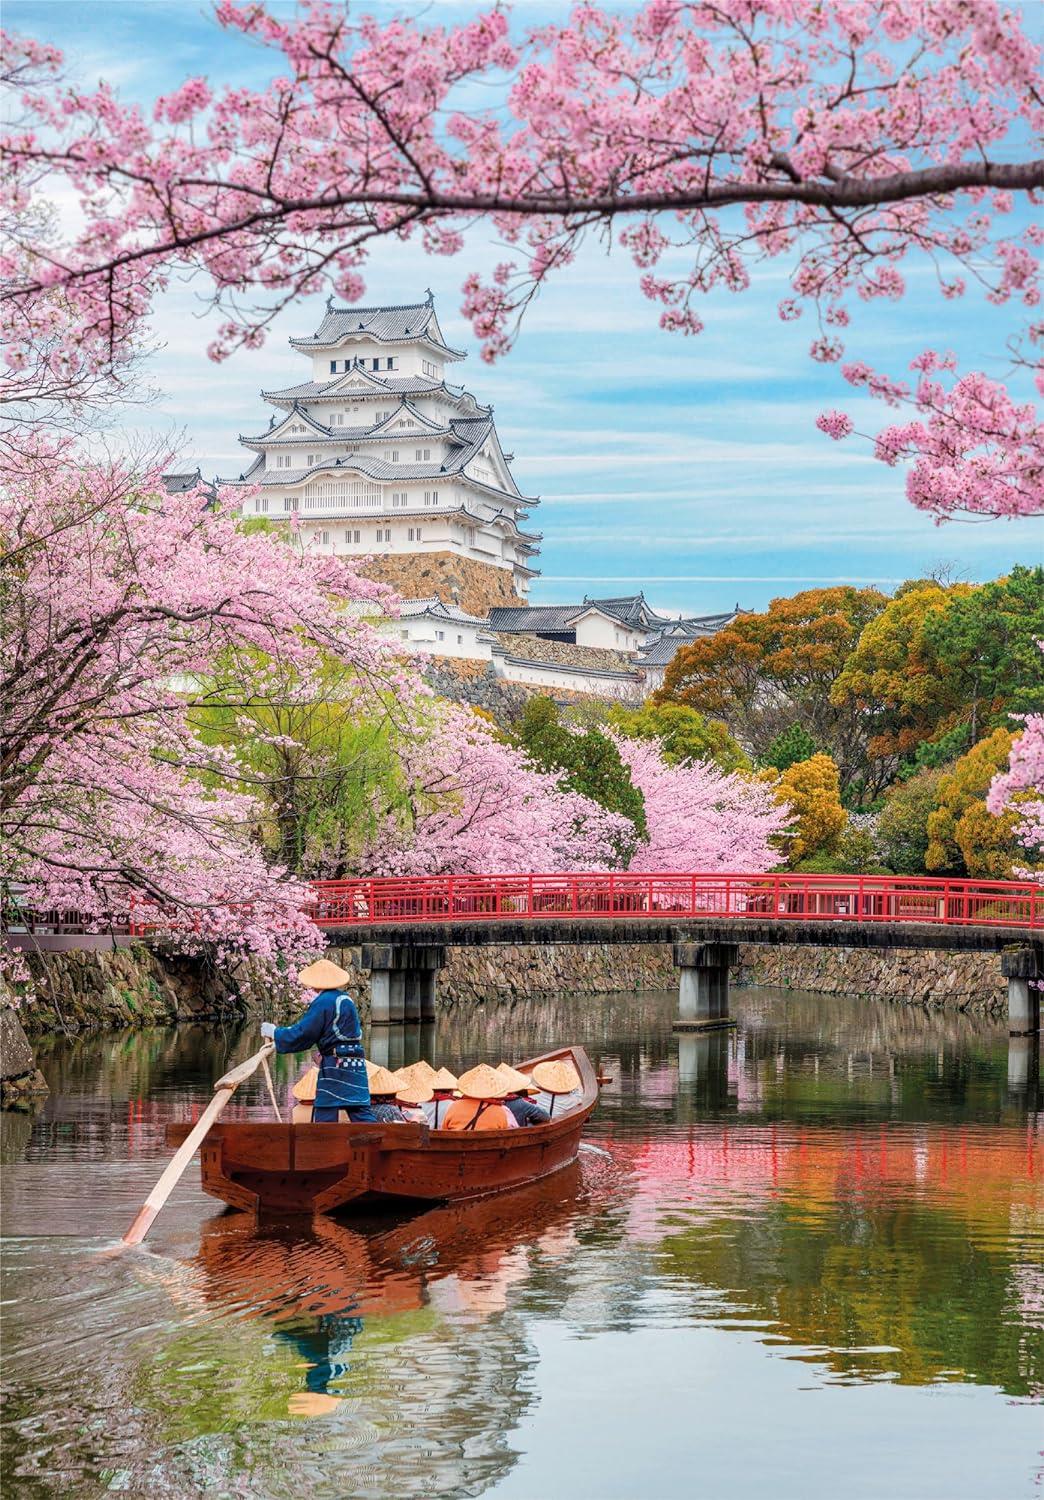 Clementoni Himeji Castle In Spring Jigsaw Puzzle (1000 Pieces)